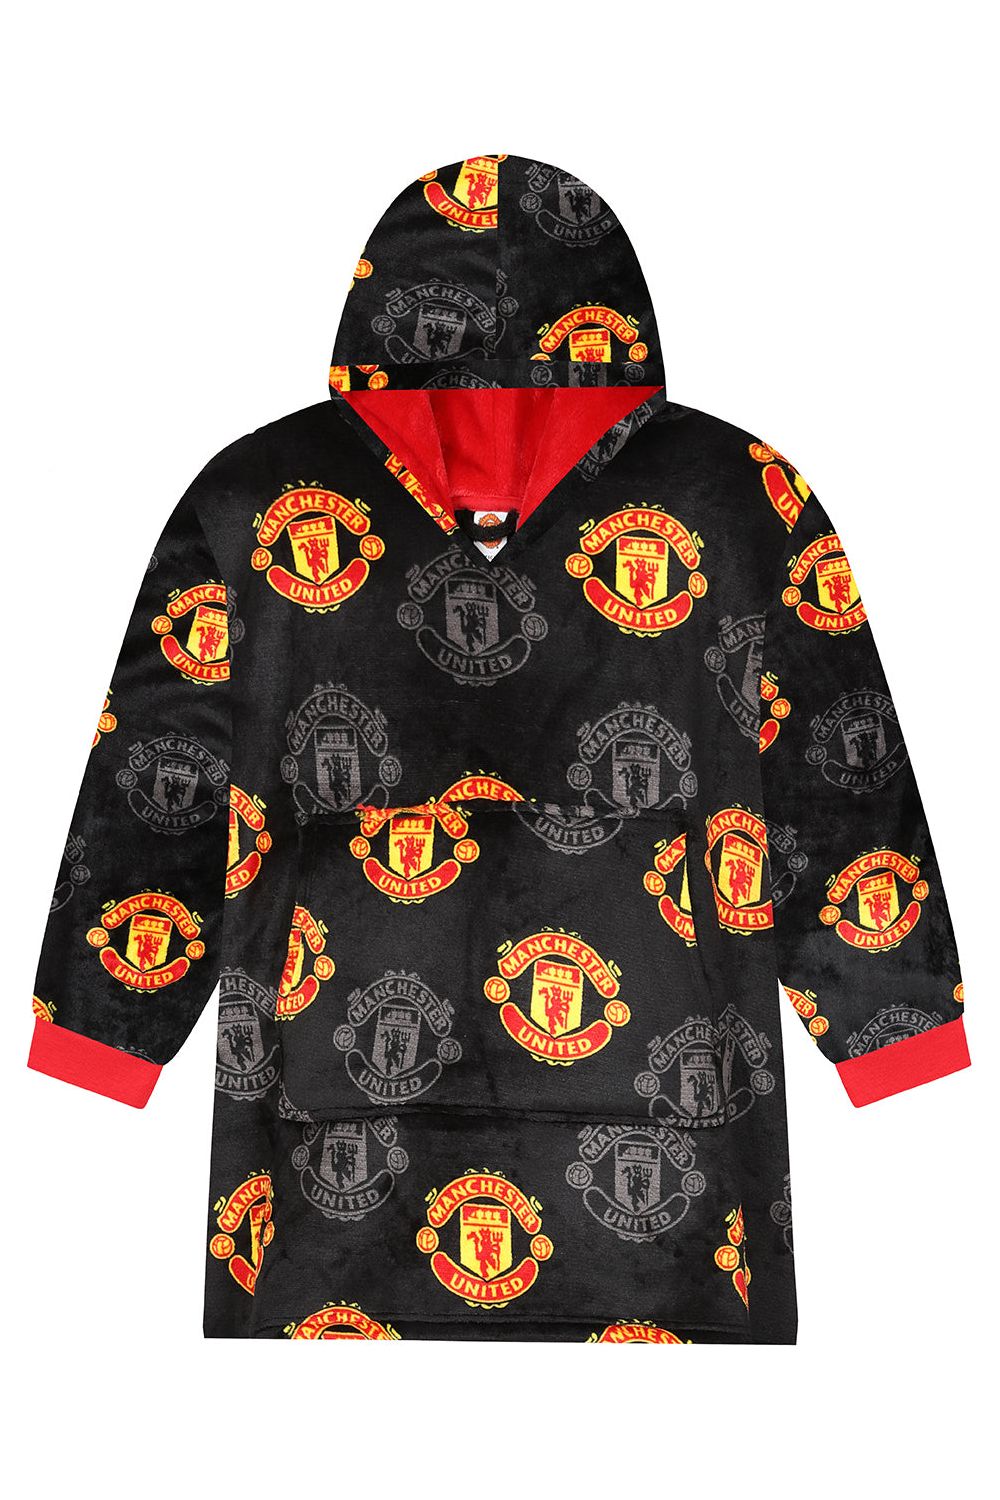 Manchester United Football Club Men's Fully Lined Luxury Fleece Oversized Hoodie Black W23